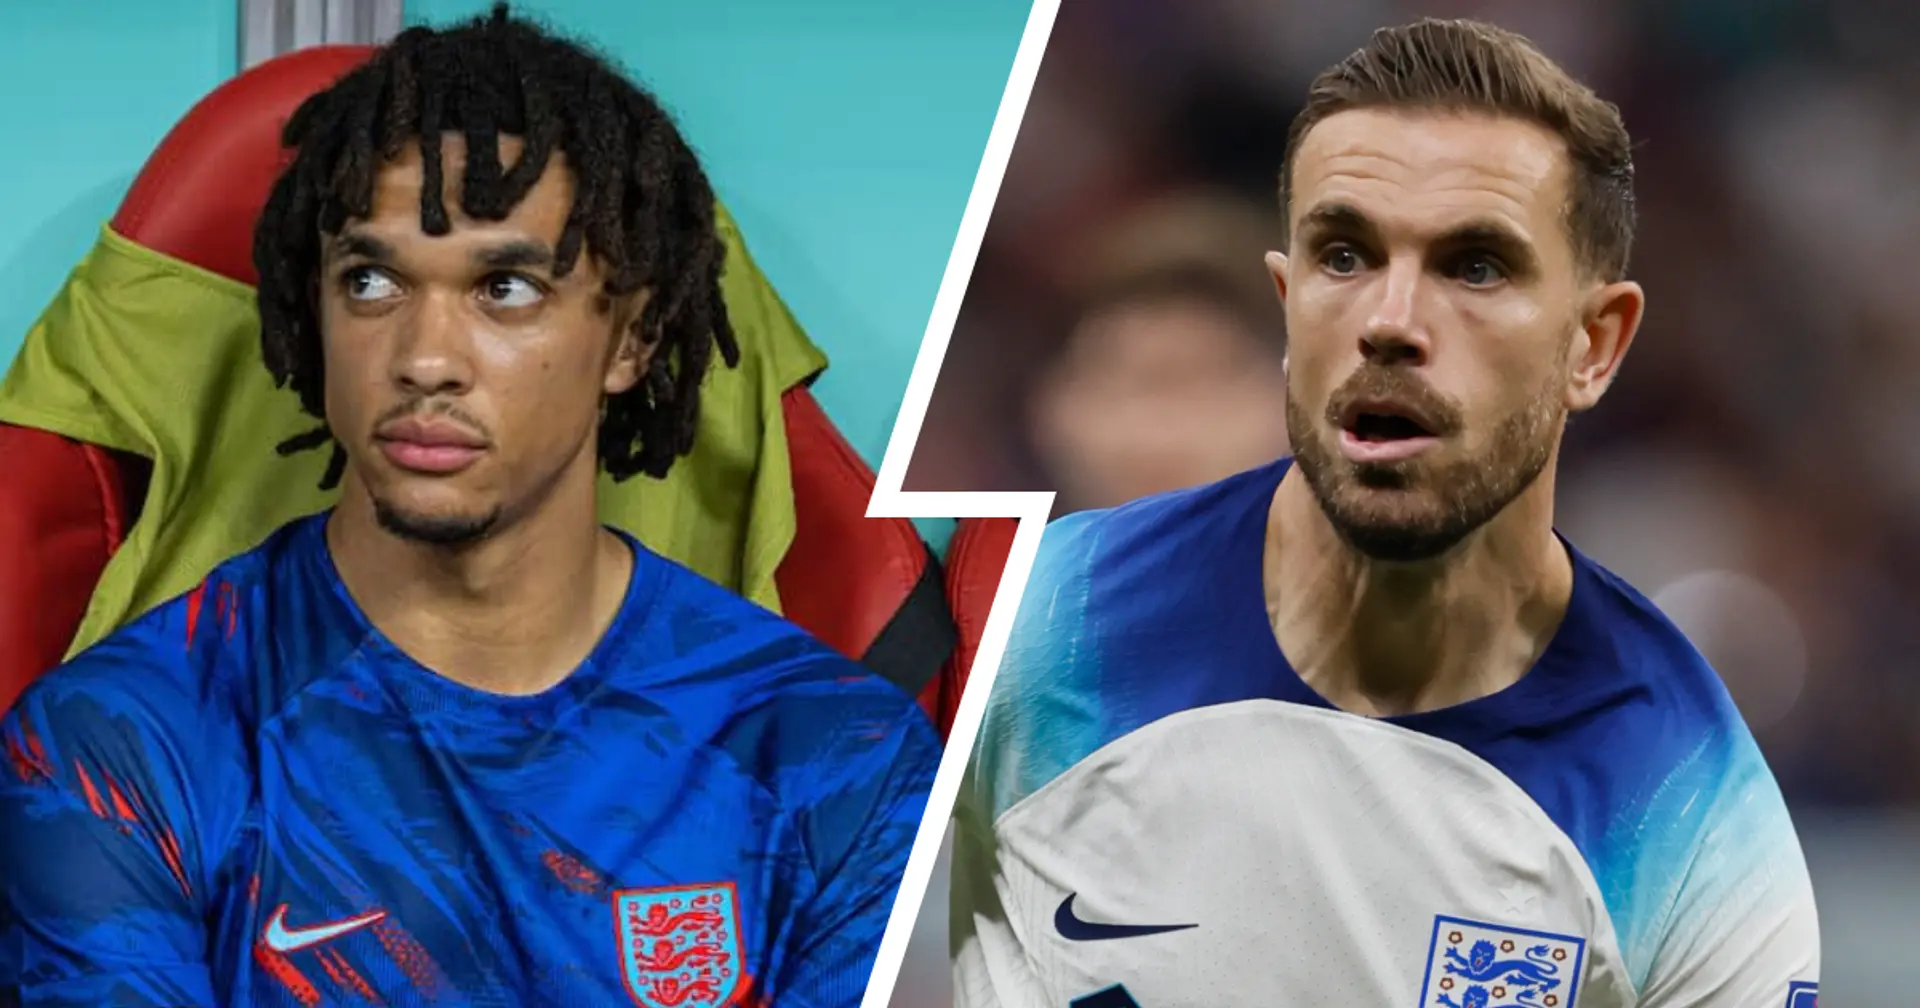 Henderson to start for England vs Wales, Trent to be snubbed again - The Telegraph